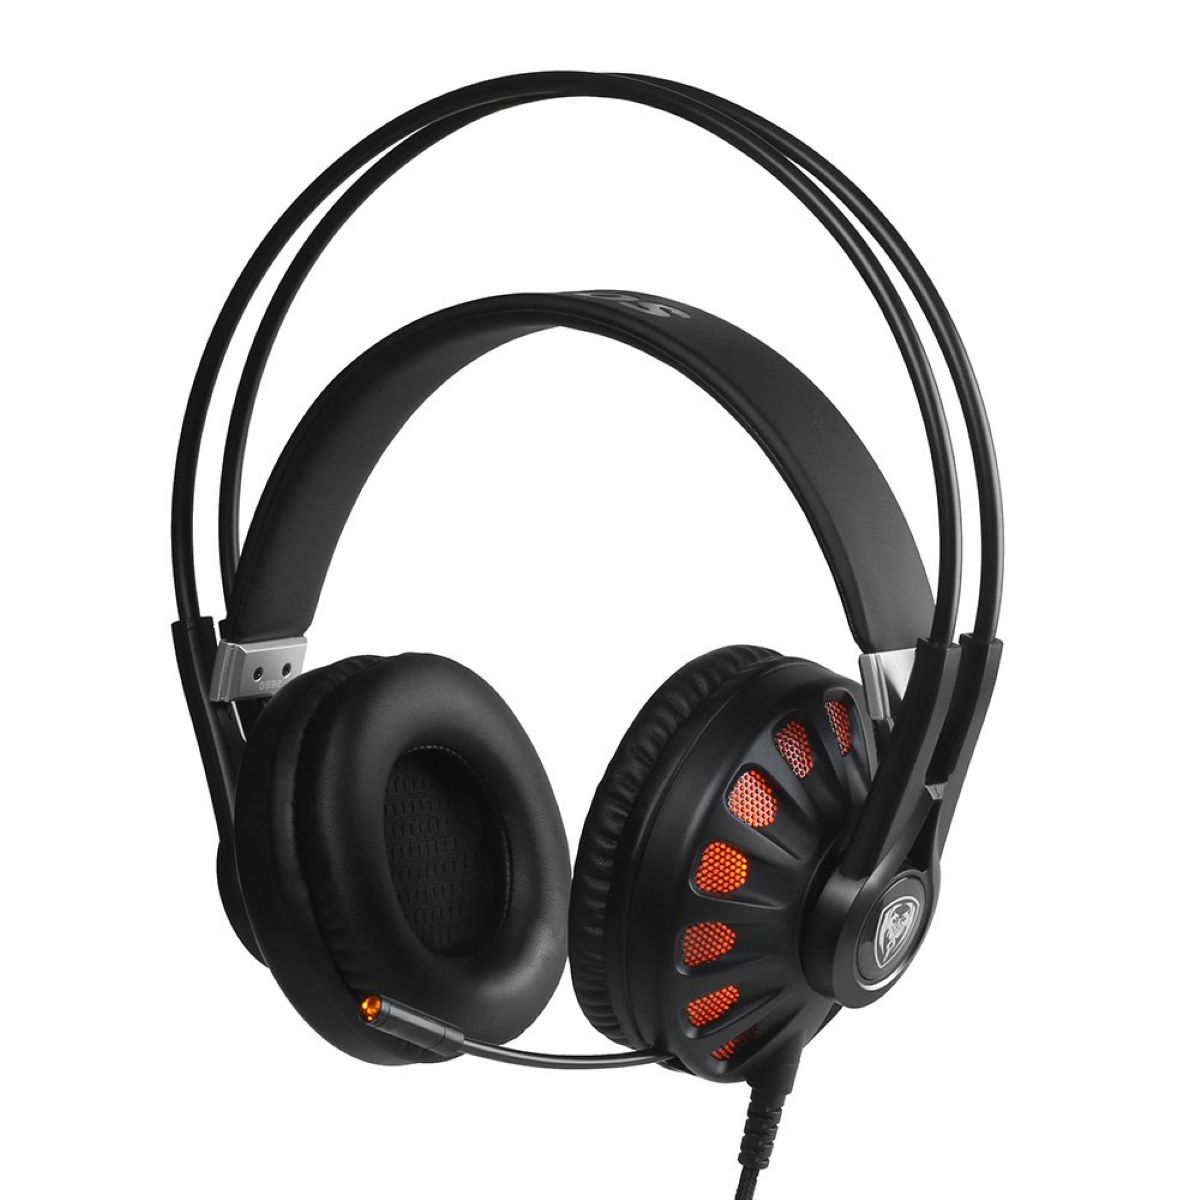 somic-g932-usb-pc-gaming-headset-7-1-virtual-surround-sound-which-side-is-left